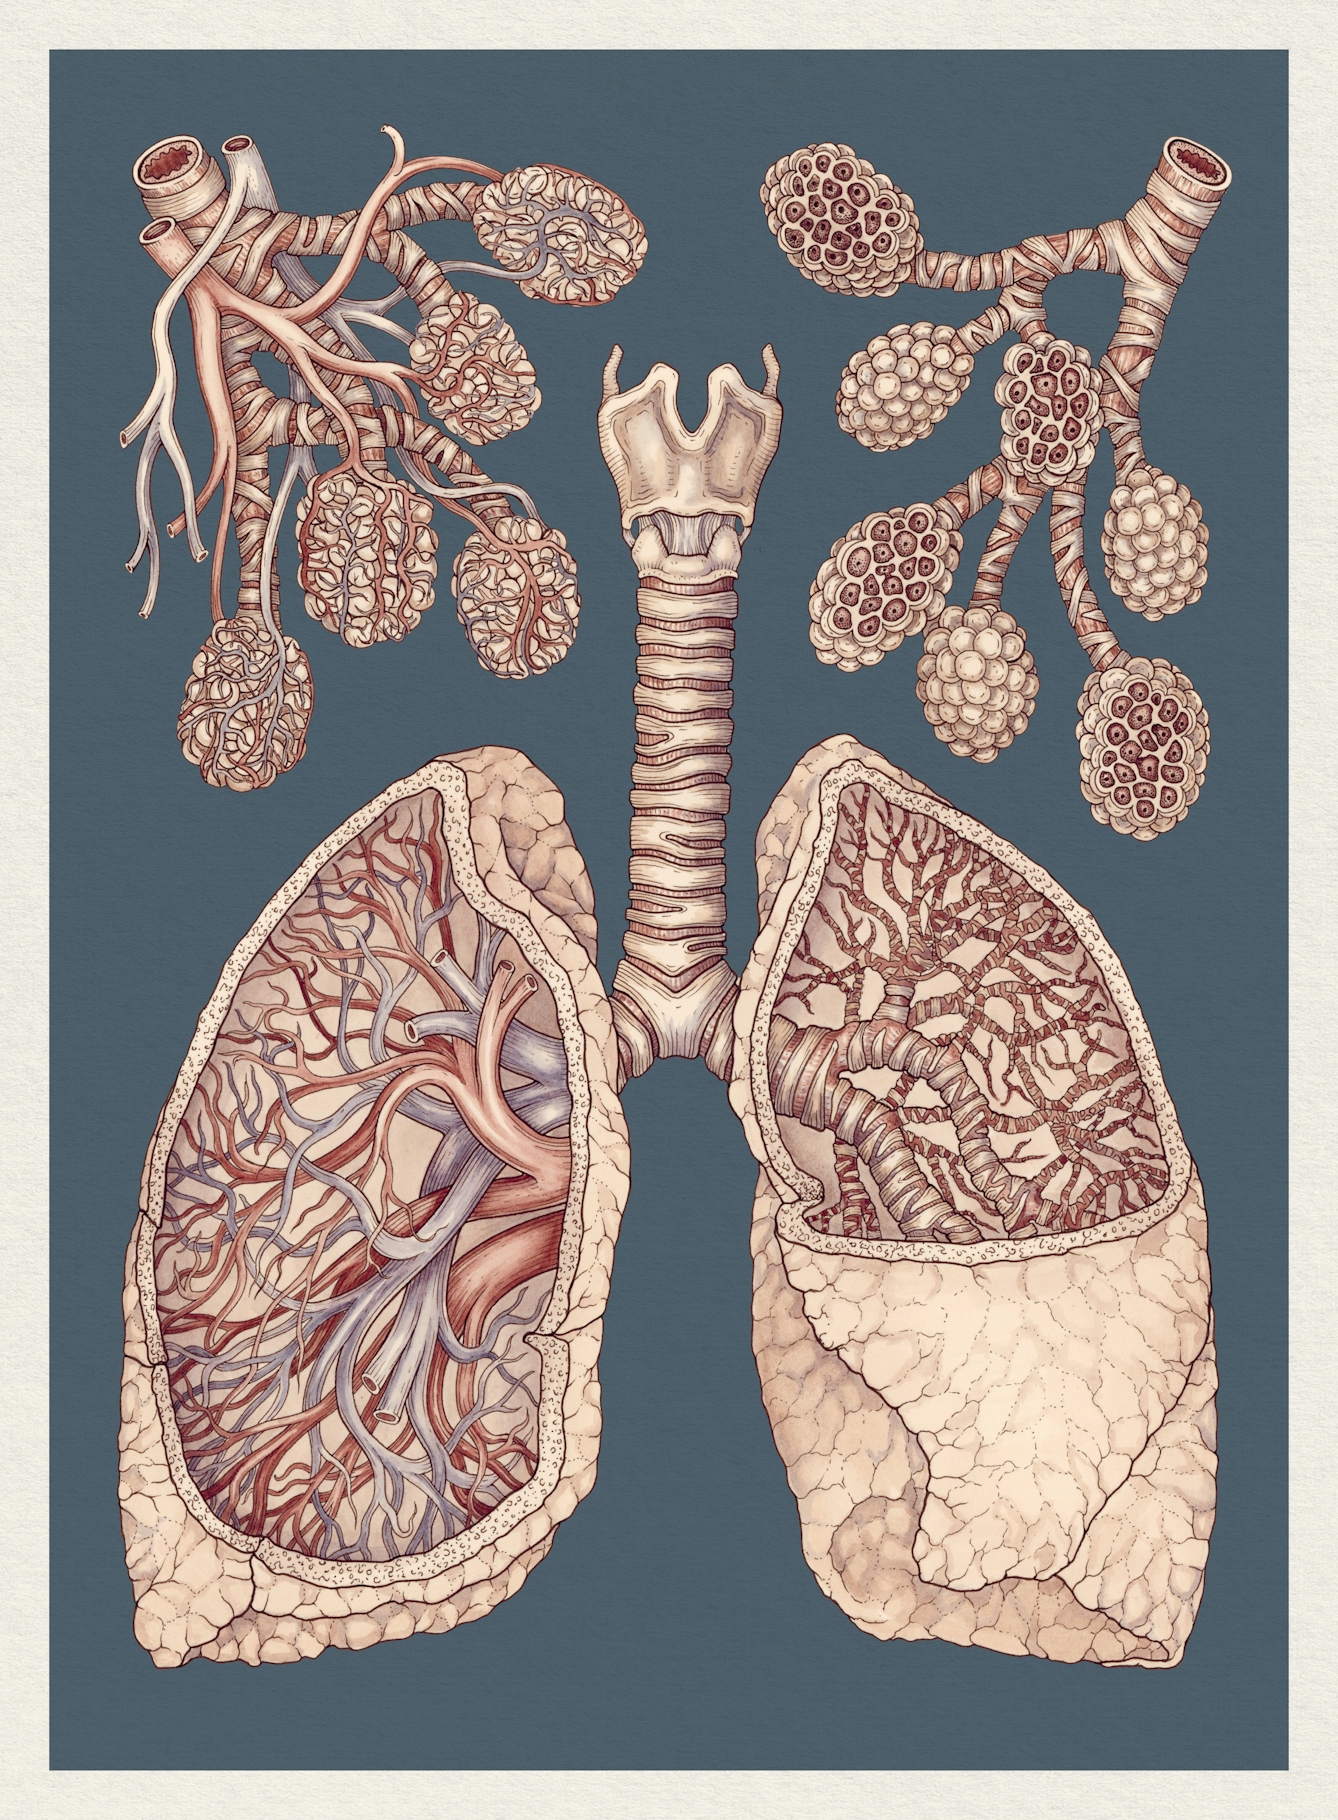 Illustration showing a cross-section of the human lungs